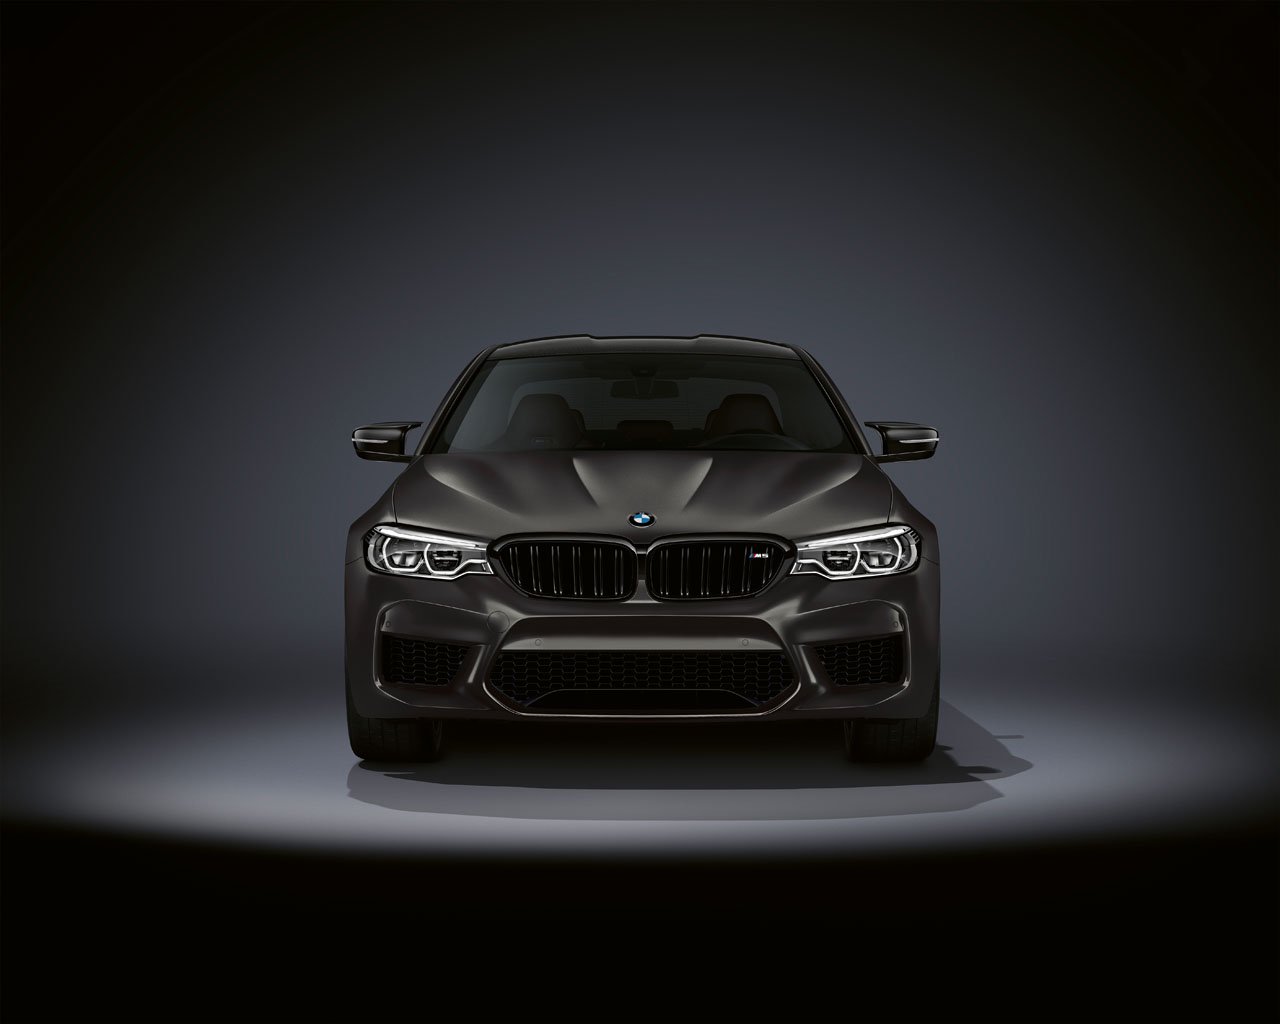 Only 35 2020 BMW M5 Edition 35 Years Cars will Come Stateside